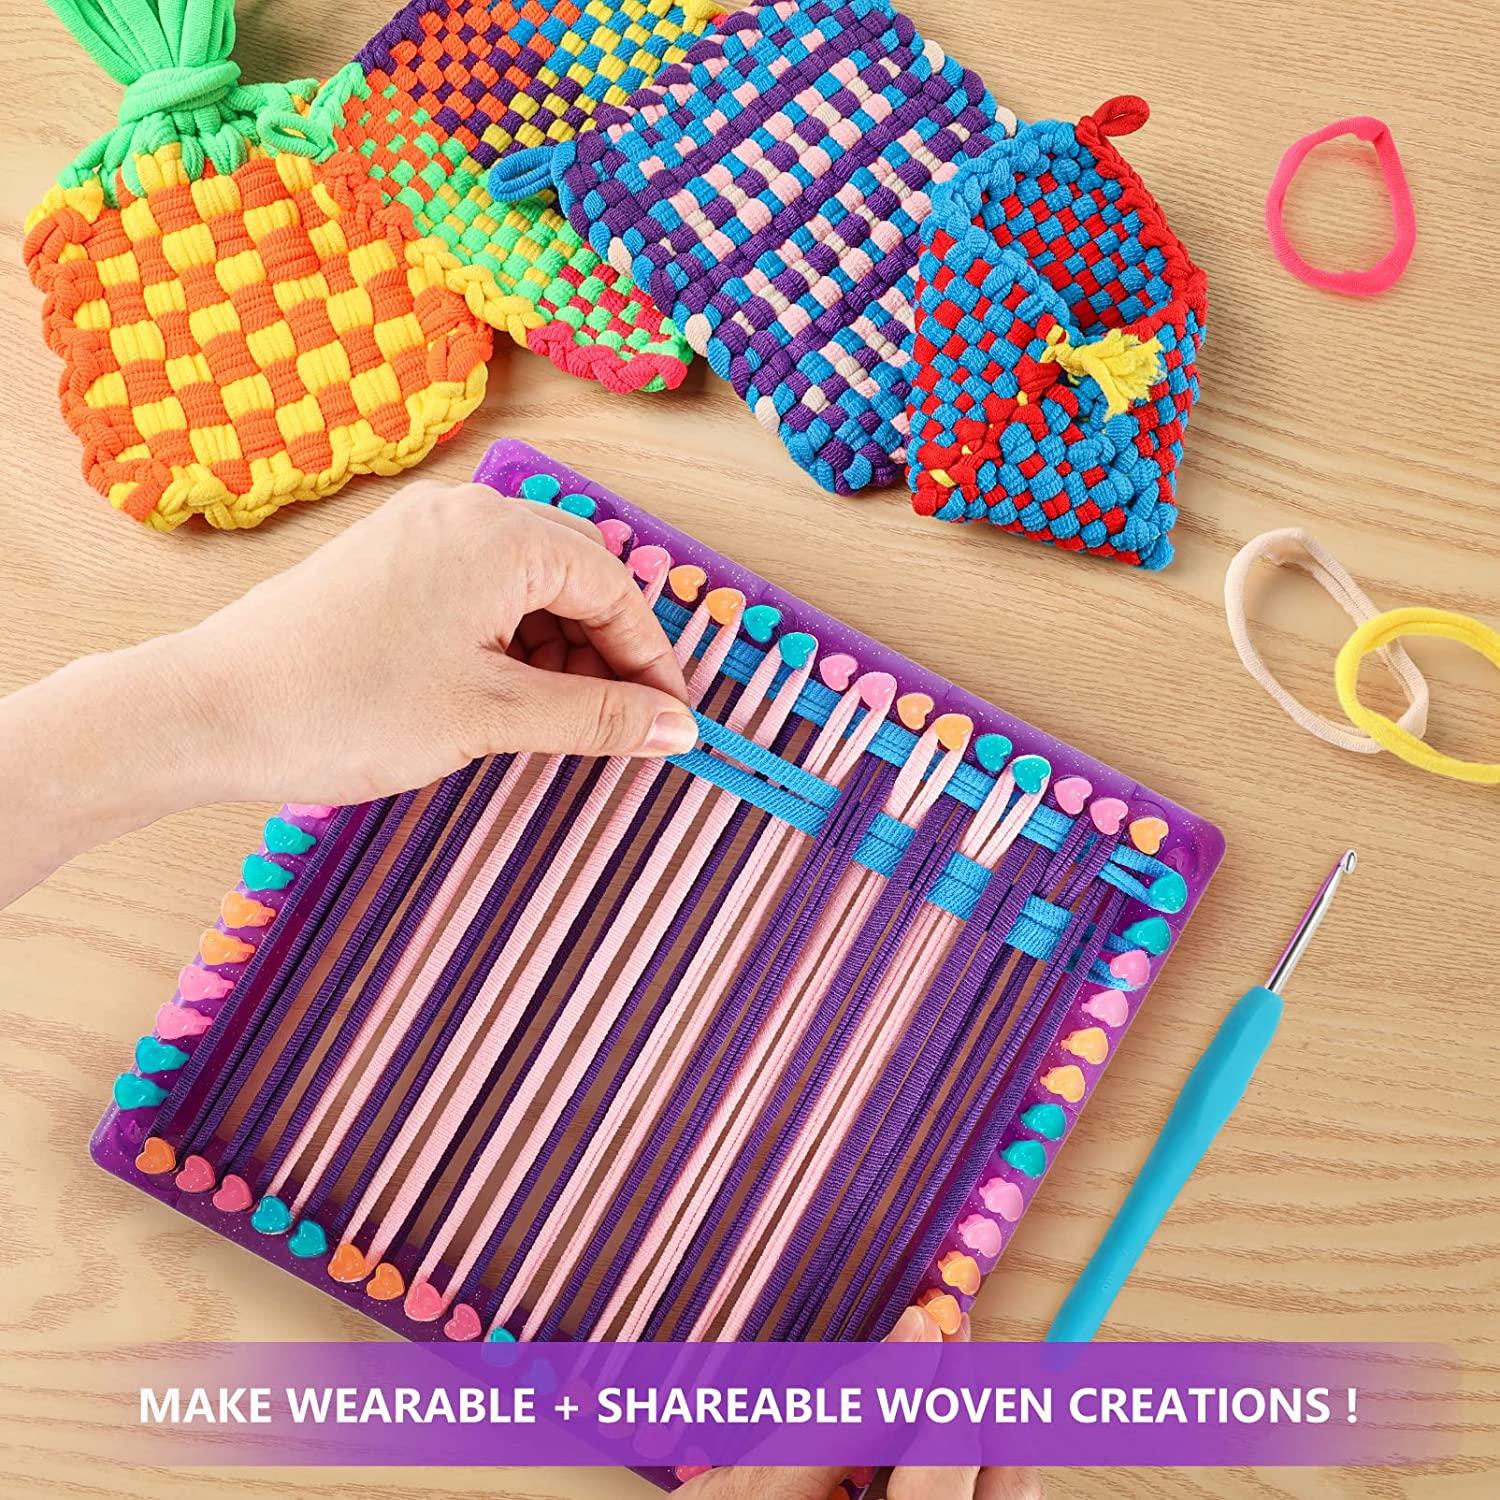 DDAI Weaving Loom Kit Crafts for Kids and Adults - Potholder Loops